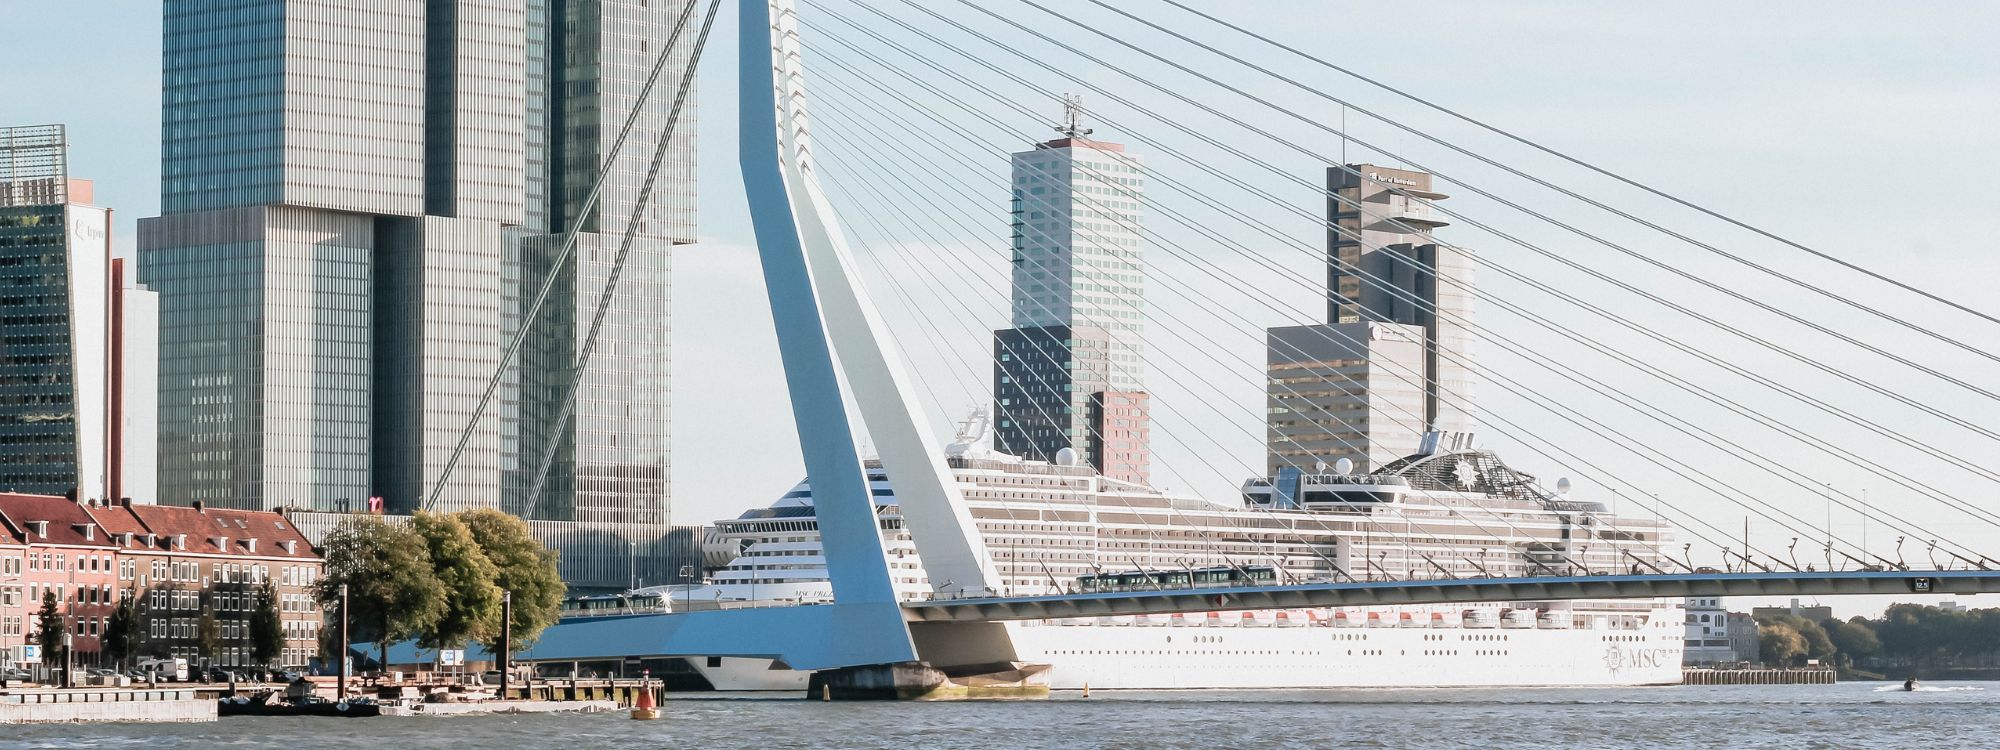 Day Excursions from Rotterdam or Amsterdam Cruise Ports